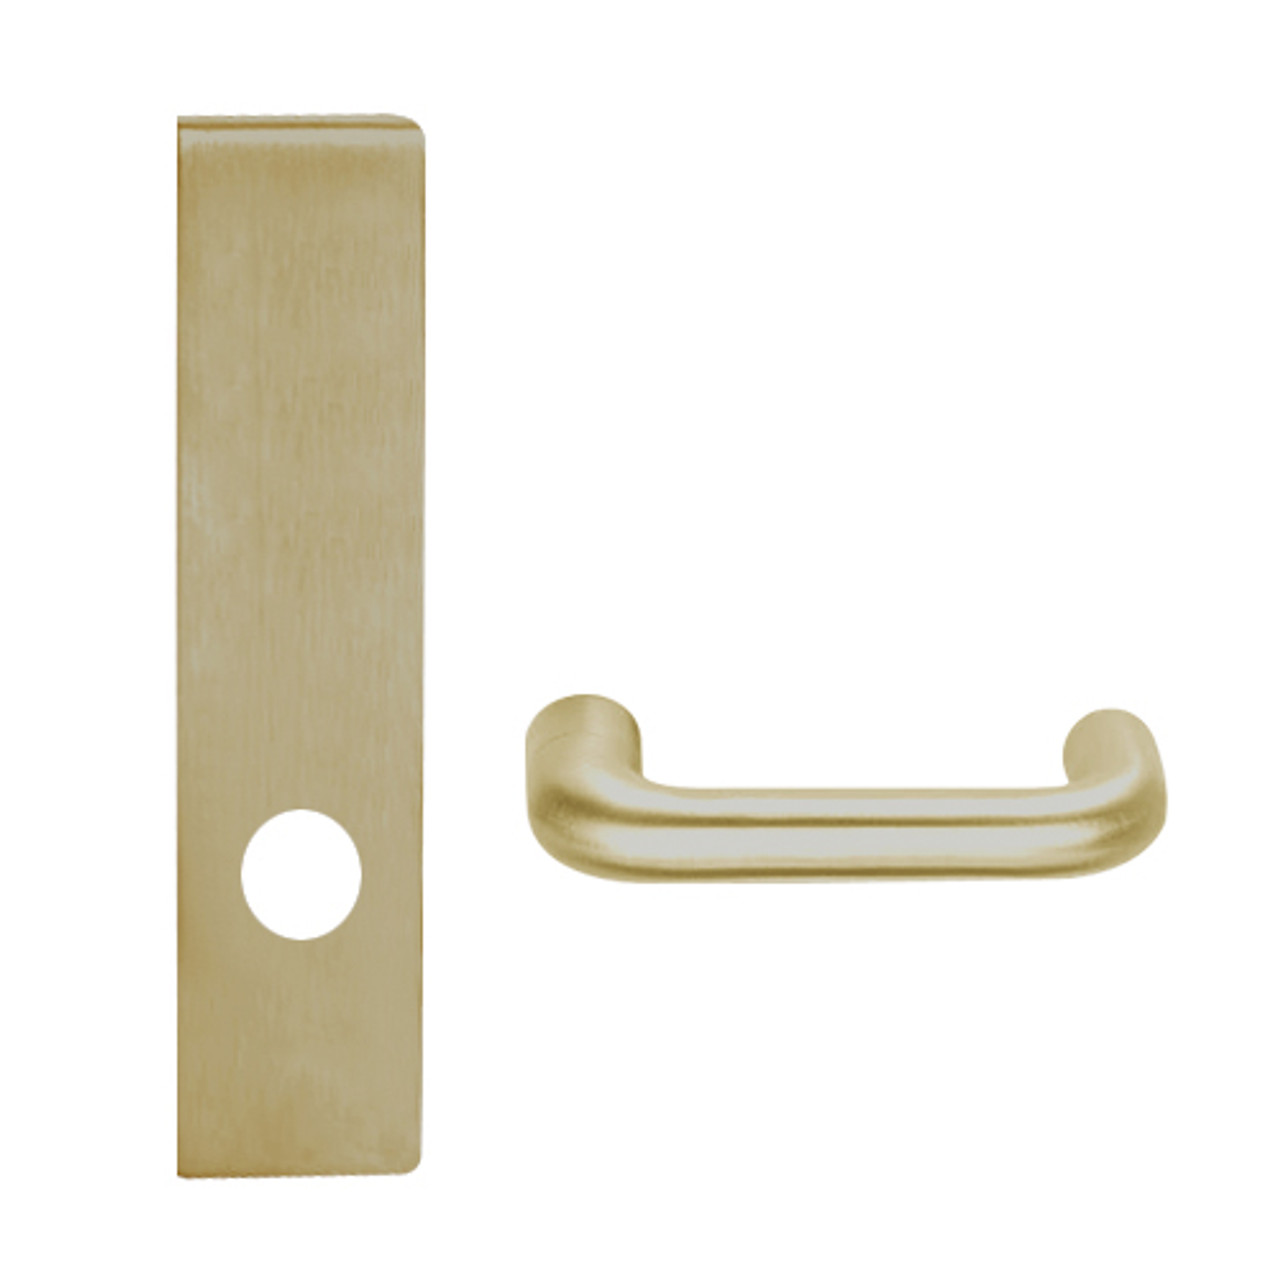 L9010-03L-612 Schlage L Series Passage Latch Commercial Mortise Lock with 03 Cast Lever Design in Satin Bronze